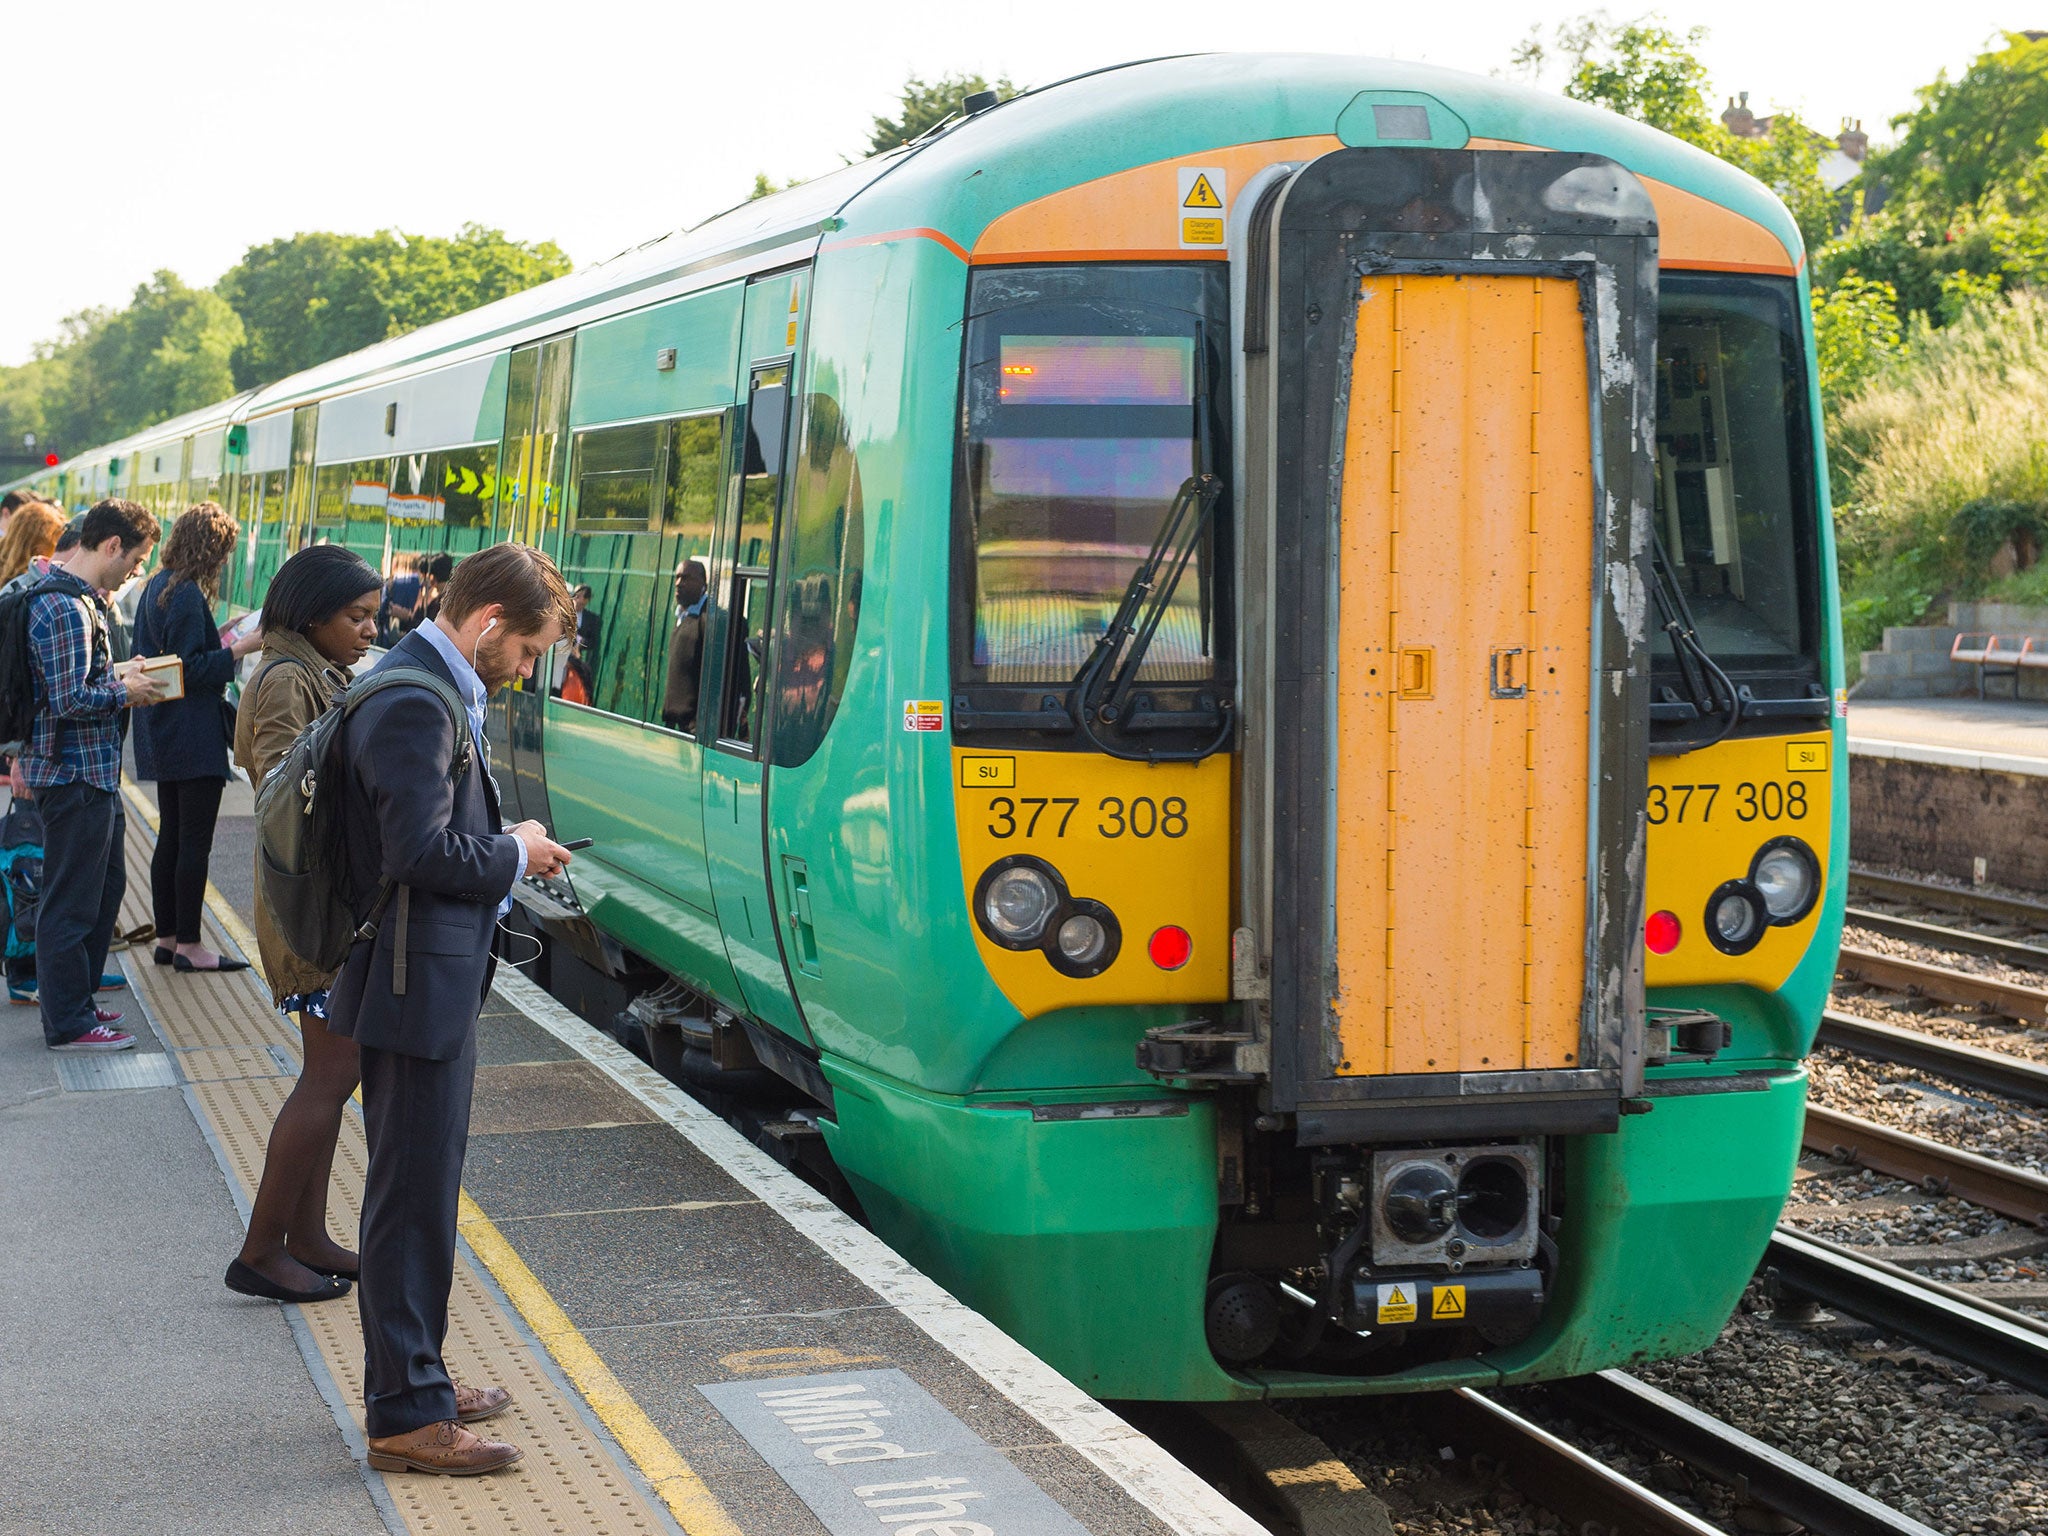 Around half of Southern services are expected to be cancelled because of the action